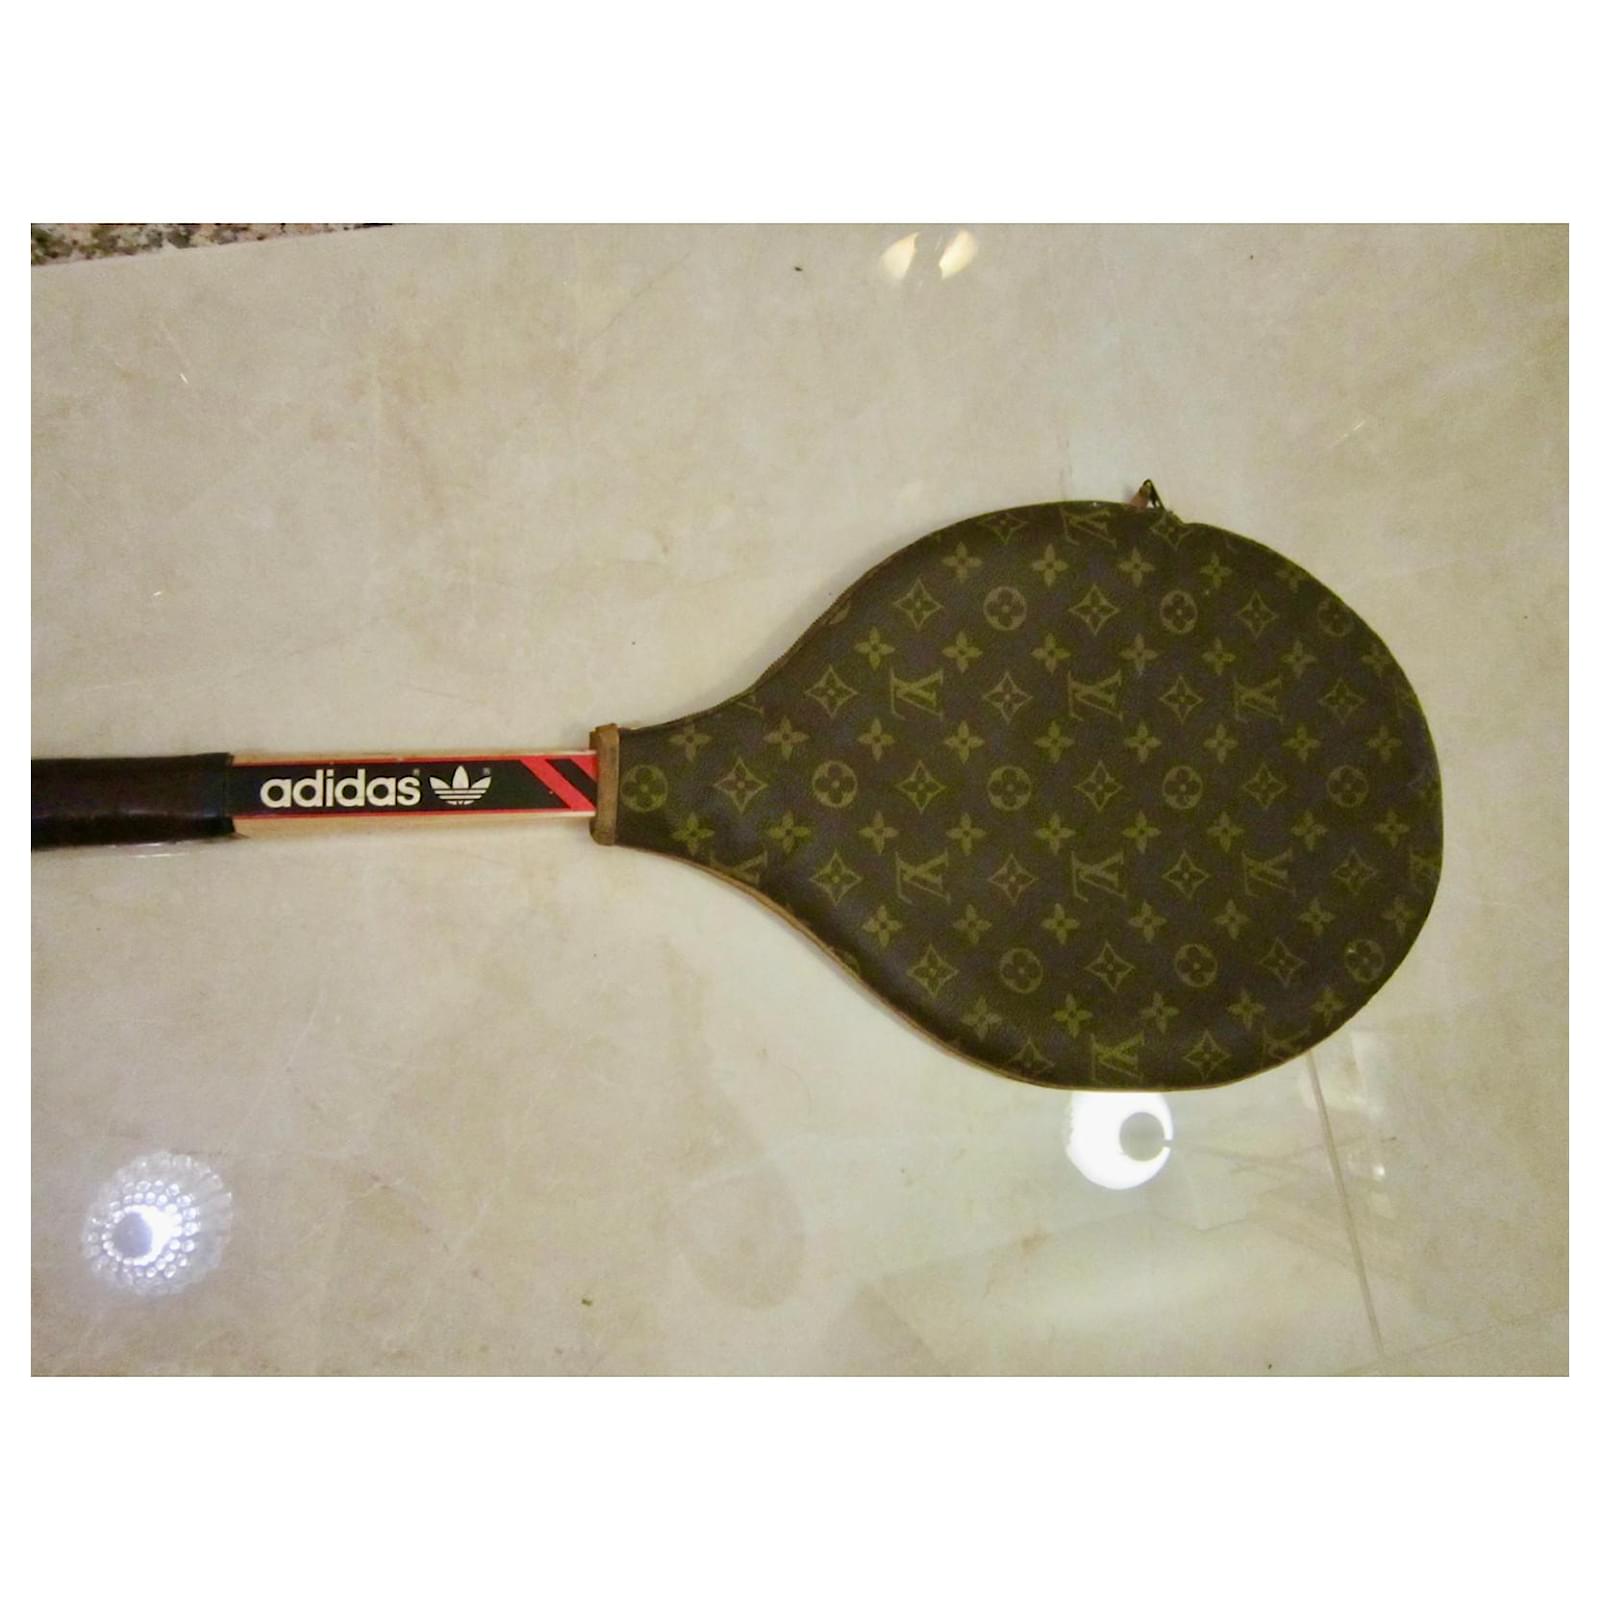 Cloth racket cover